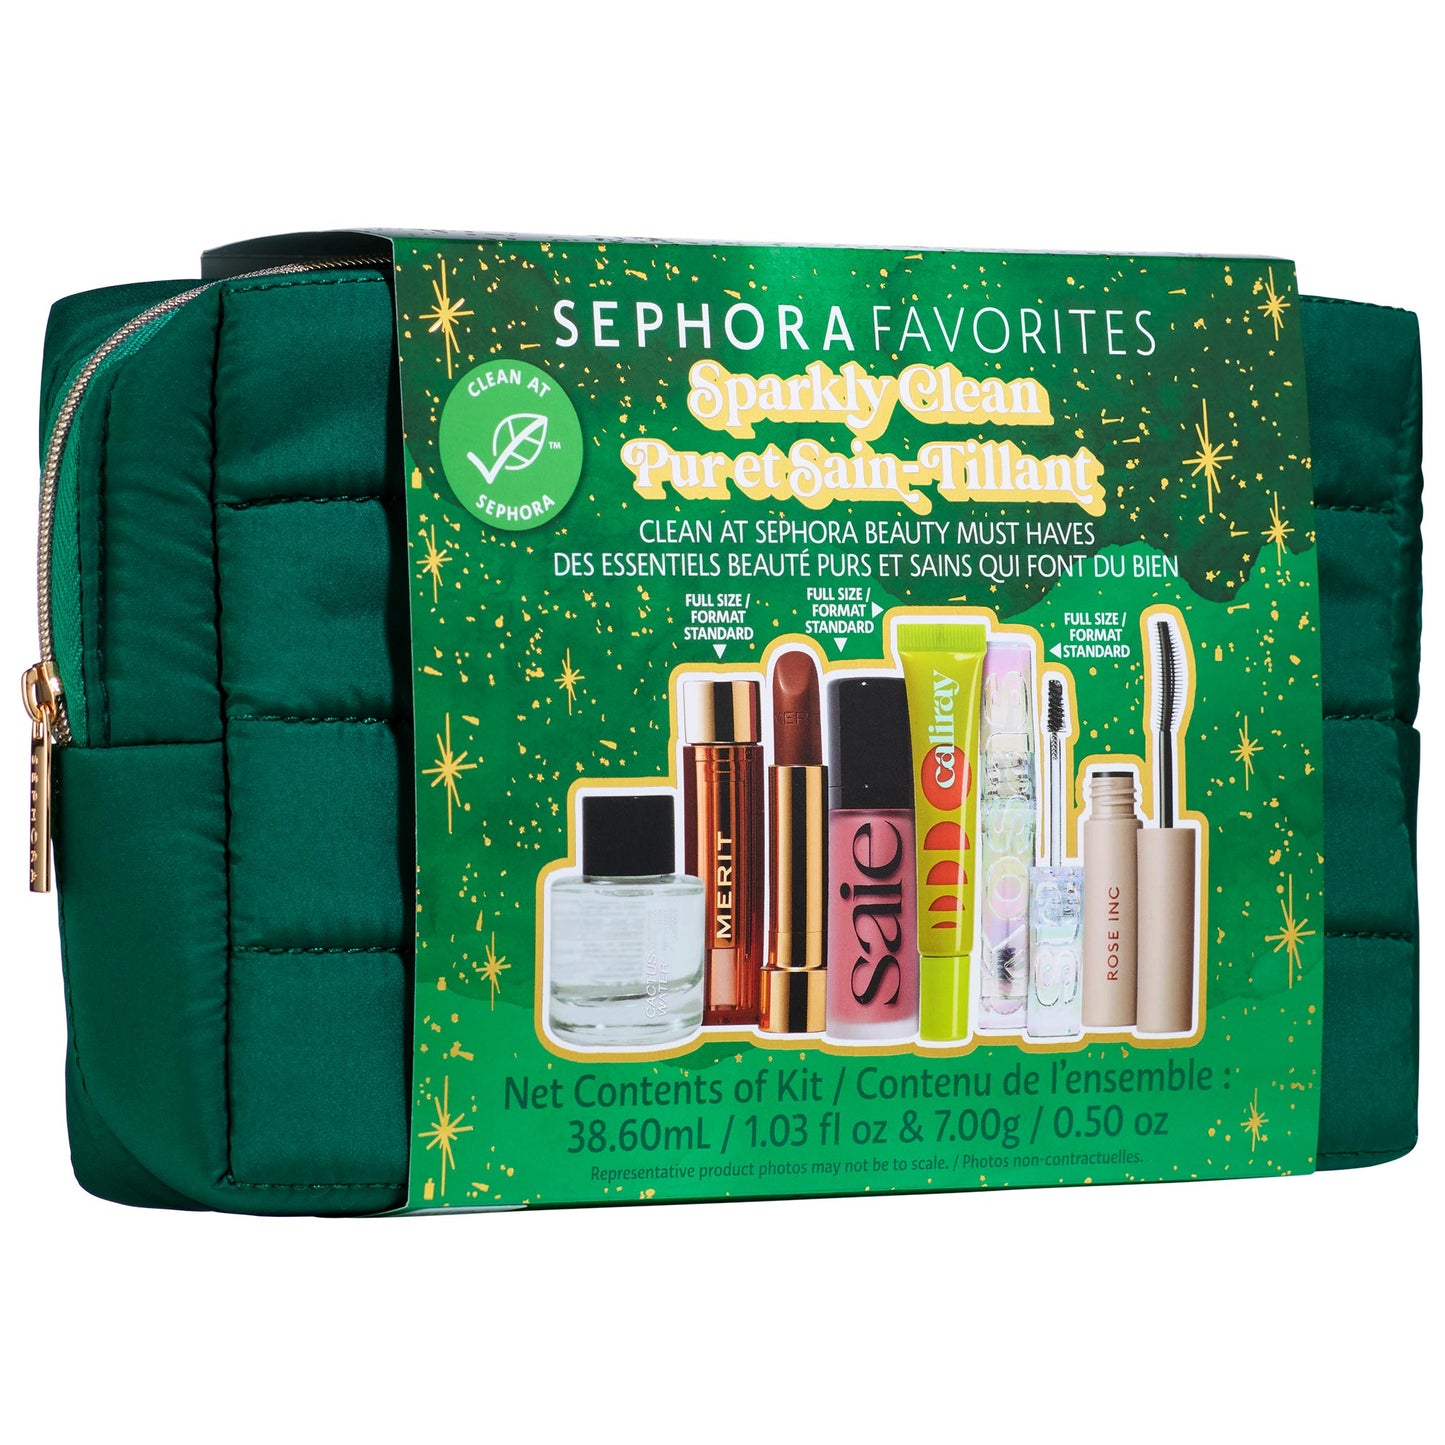 Sephora Favorites, Holiday Sparkly Clean Beauty Kit